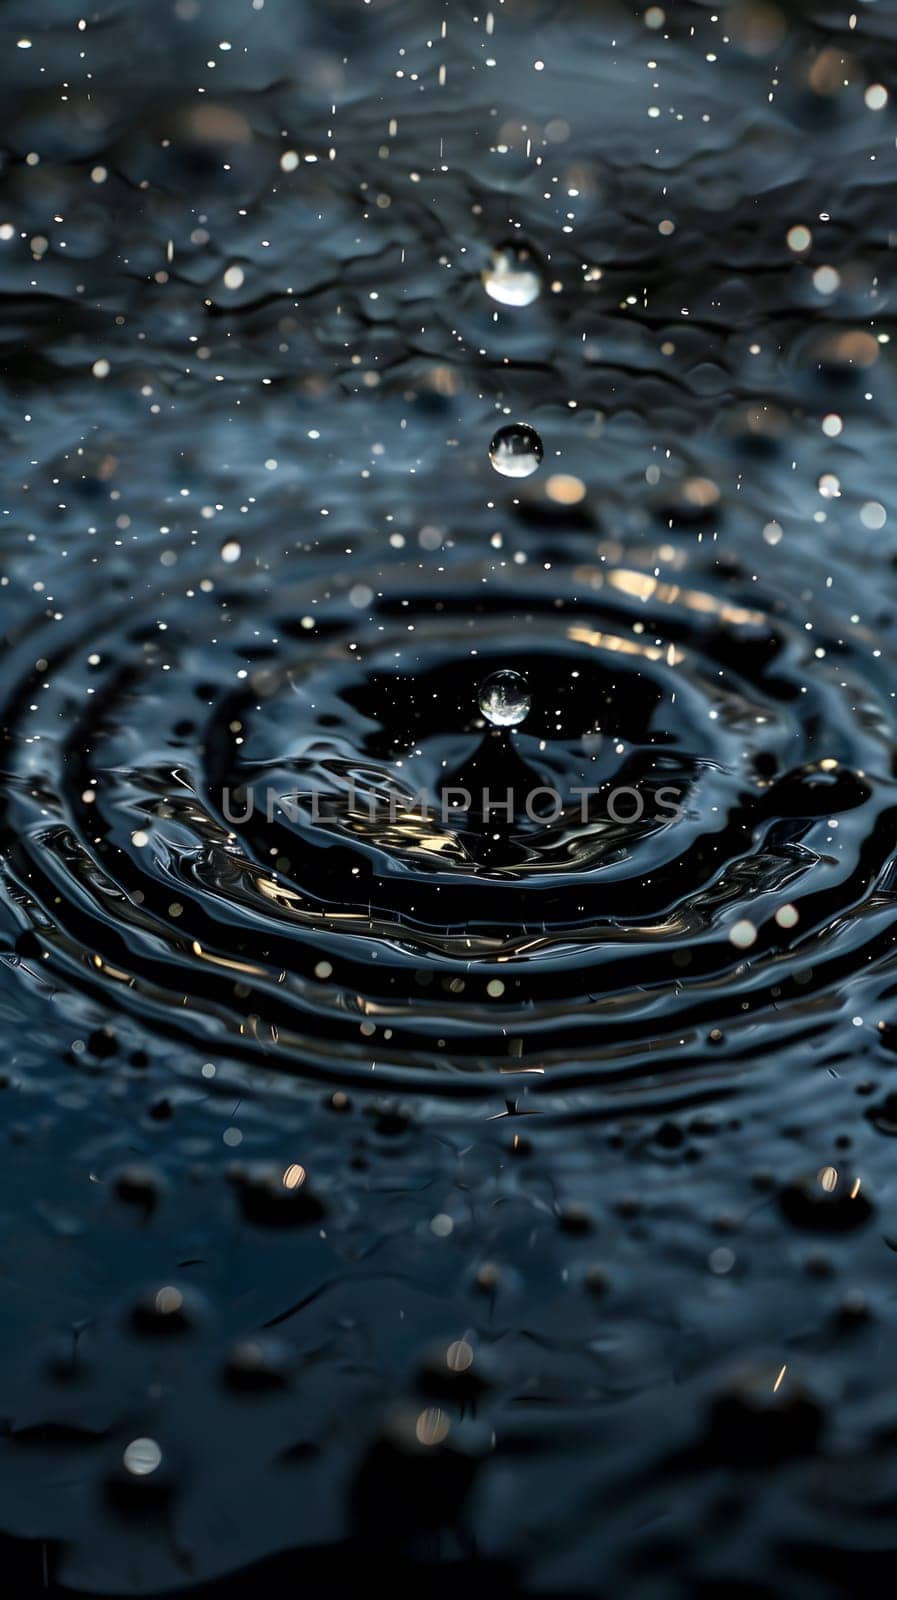 A drop of precipitation falls into a puddle, creating a pattern of electric blue circles in the water, adding moisture to the liquid surface